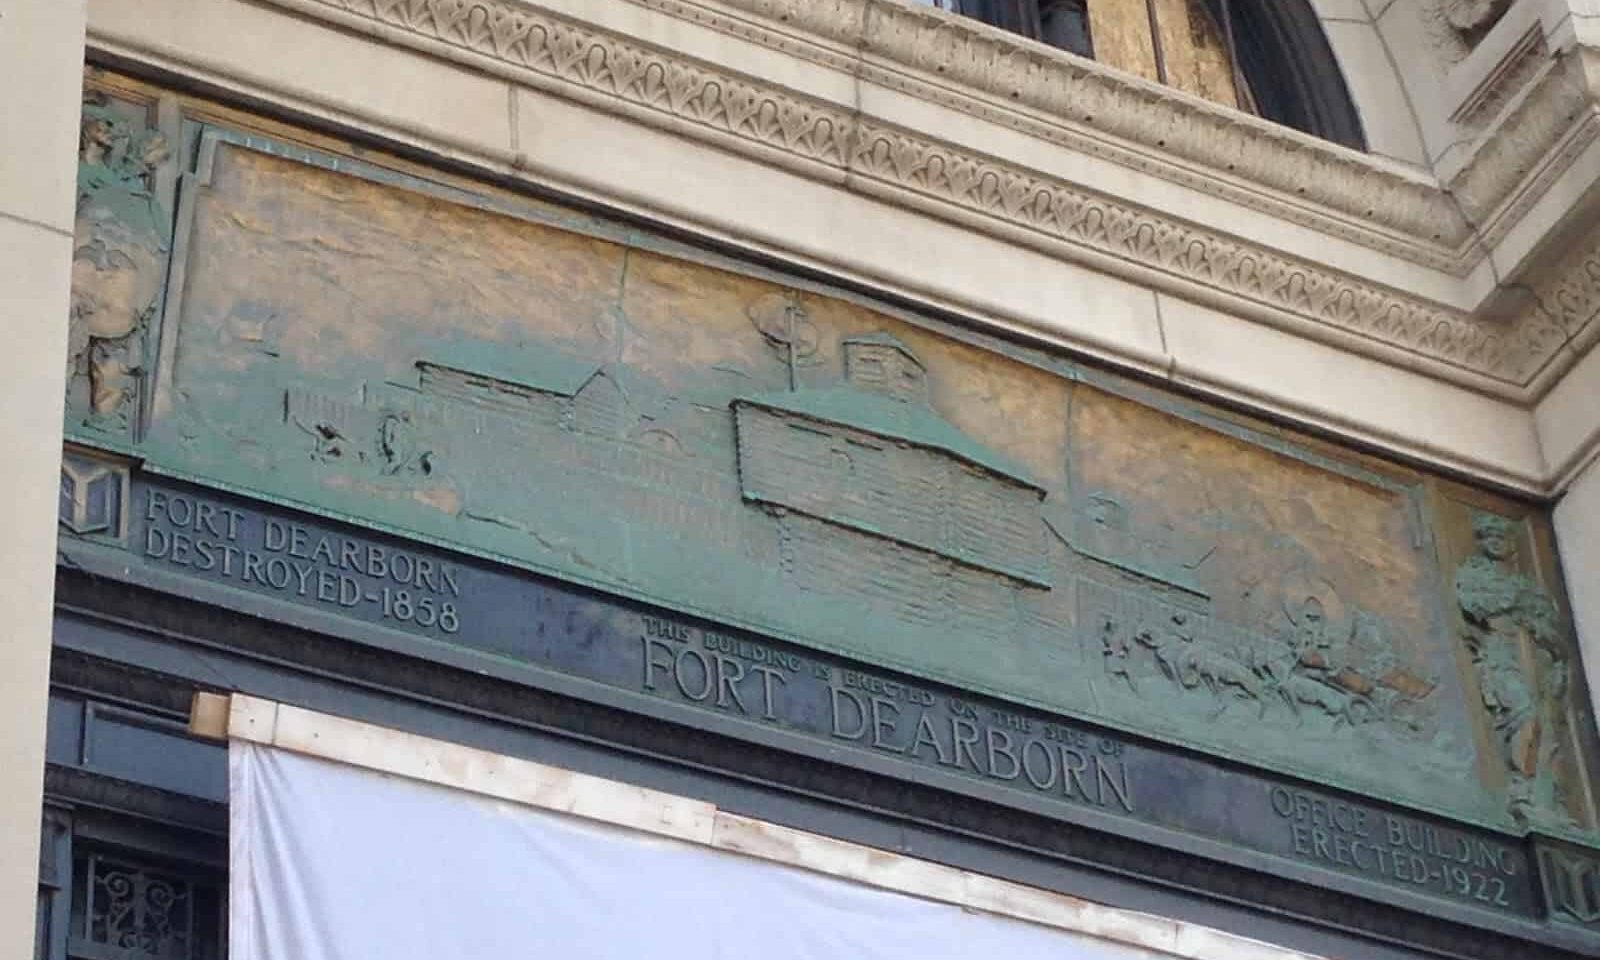 Fort Dearborn plaque on the London Guarantee Building in Chicago